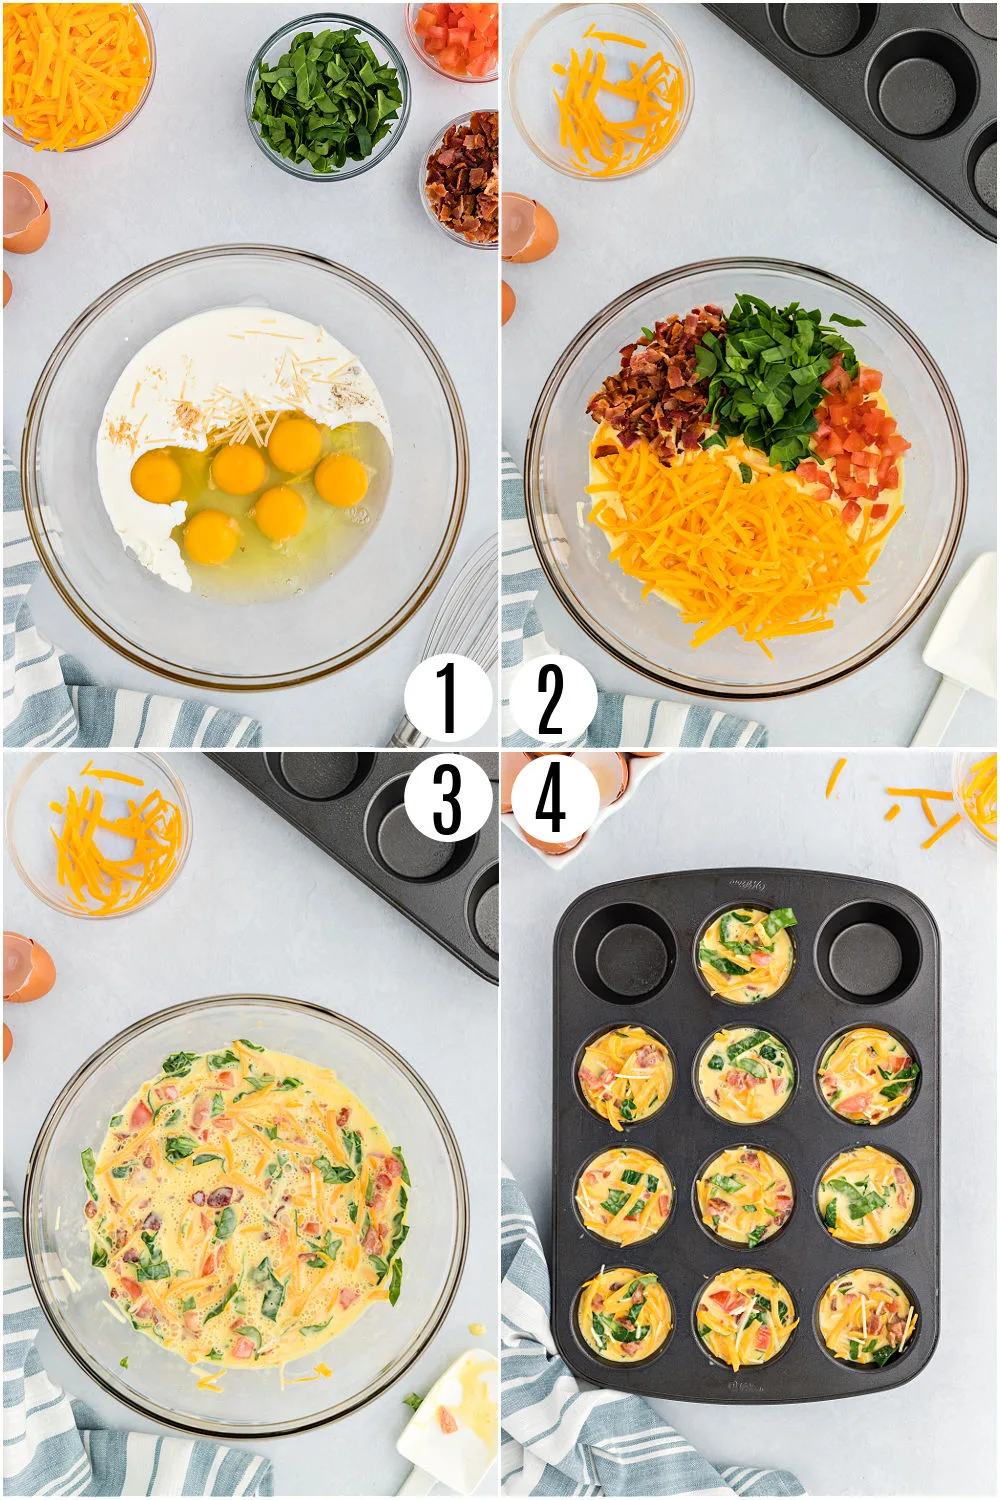 Step by step photos showing how to make egg bites in muffin tin.